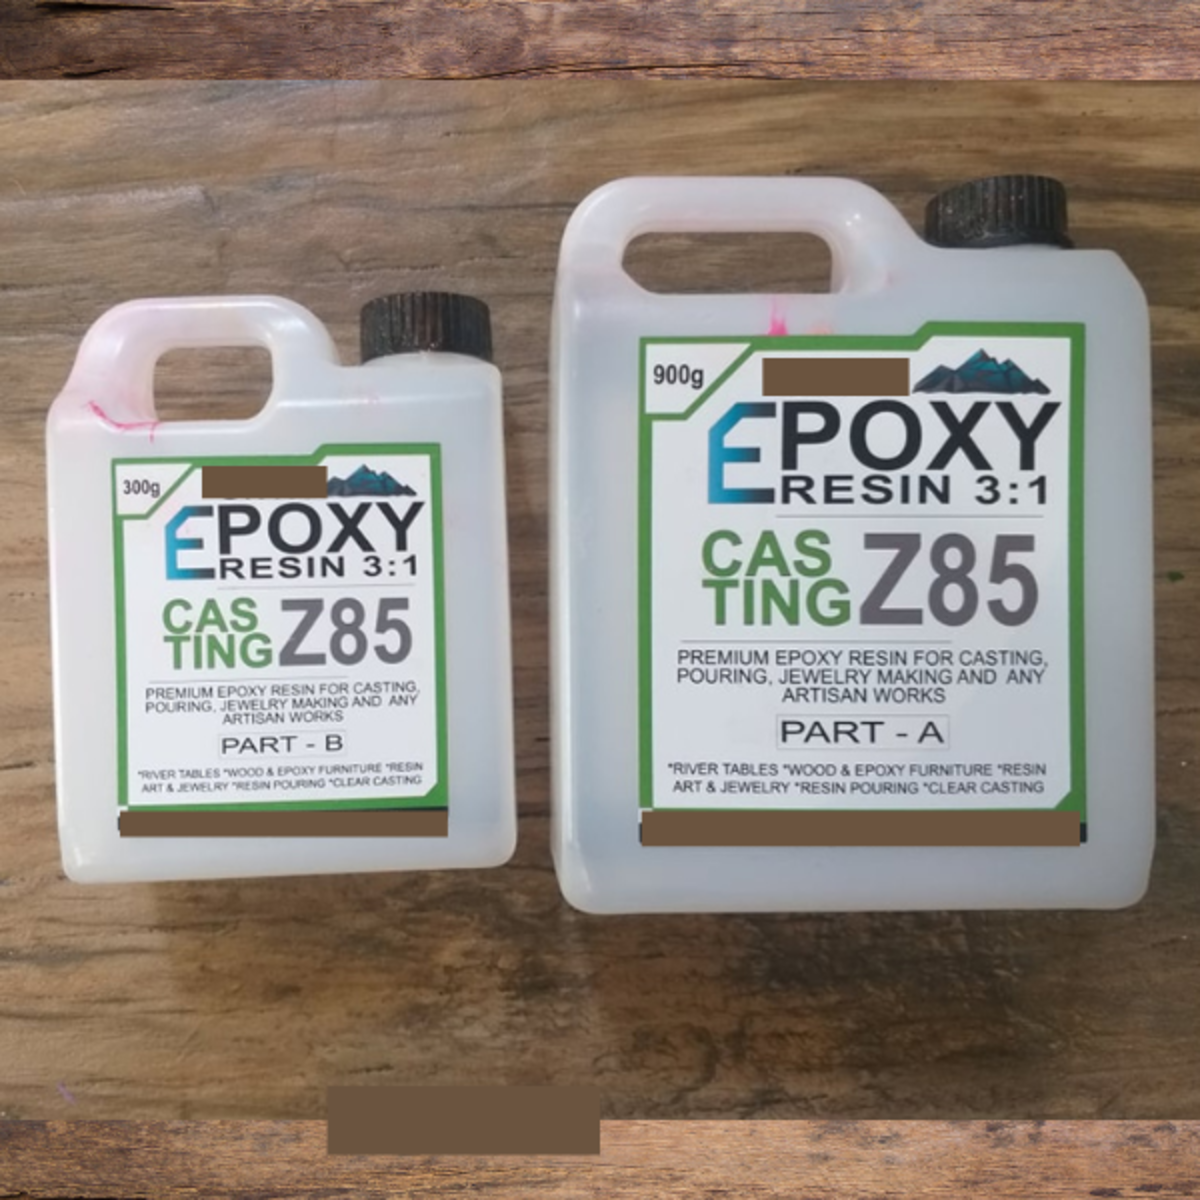 Here are examples of epoxy resin (resin and hardener).